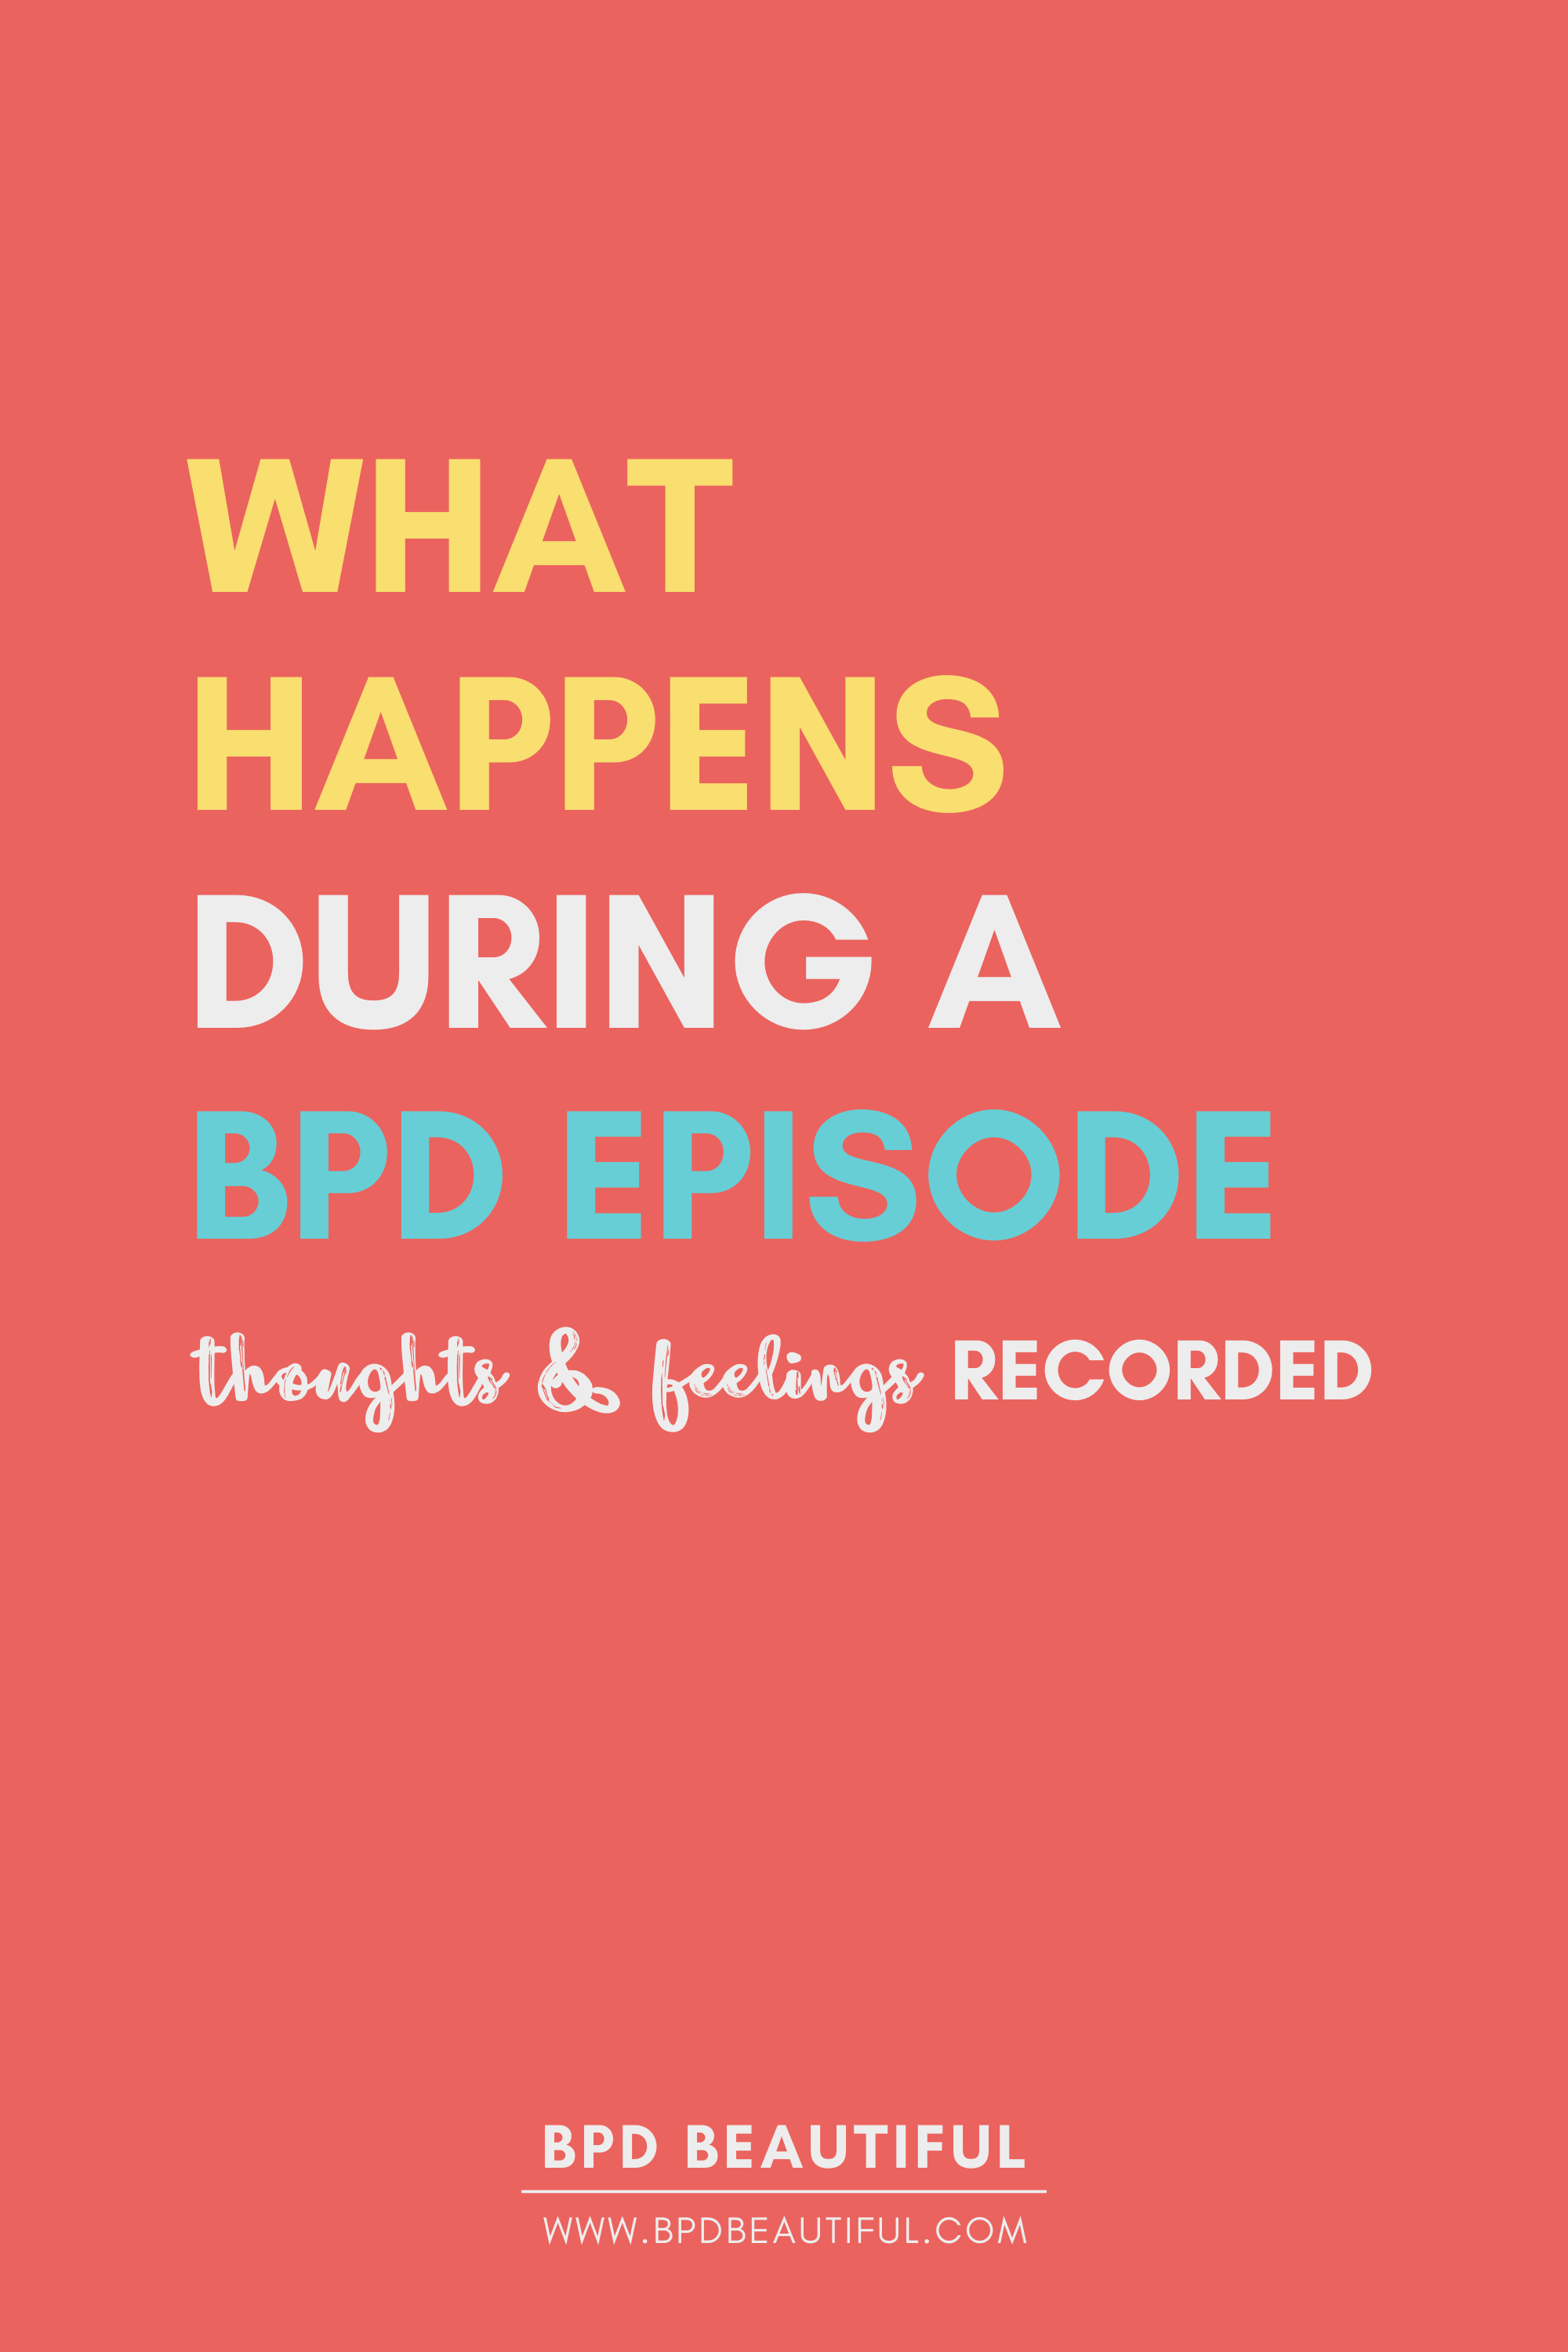 post graphic title that says what happens during a BPD episode (thoughts and feelings recorded)